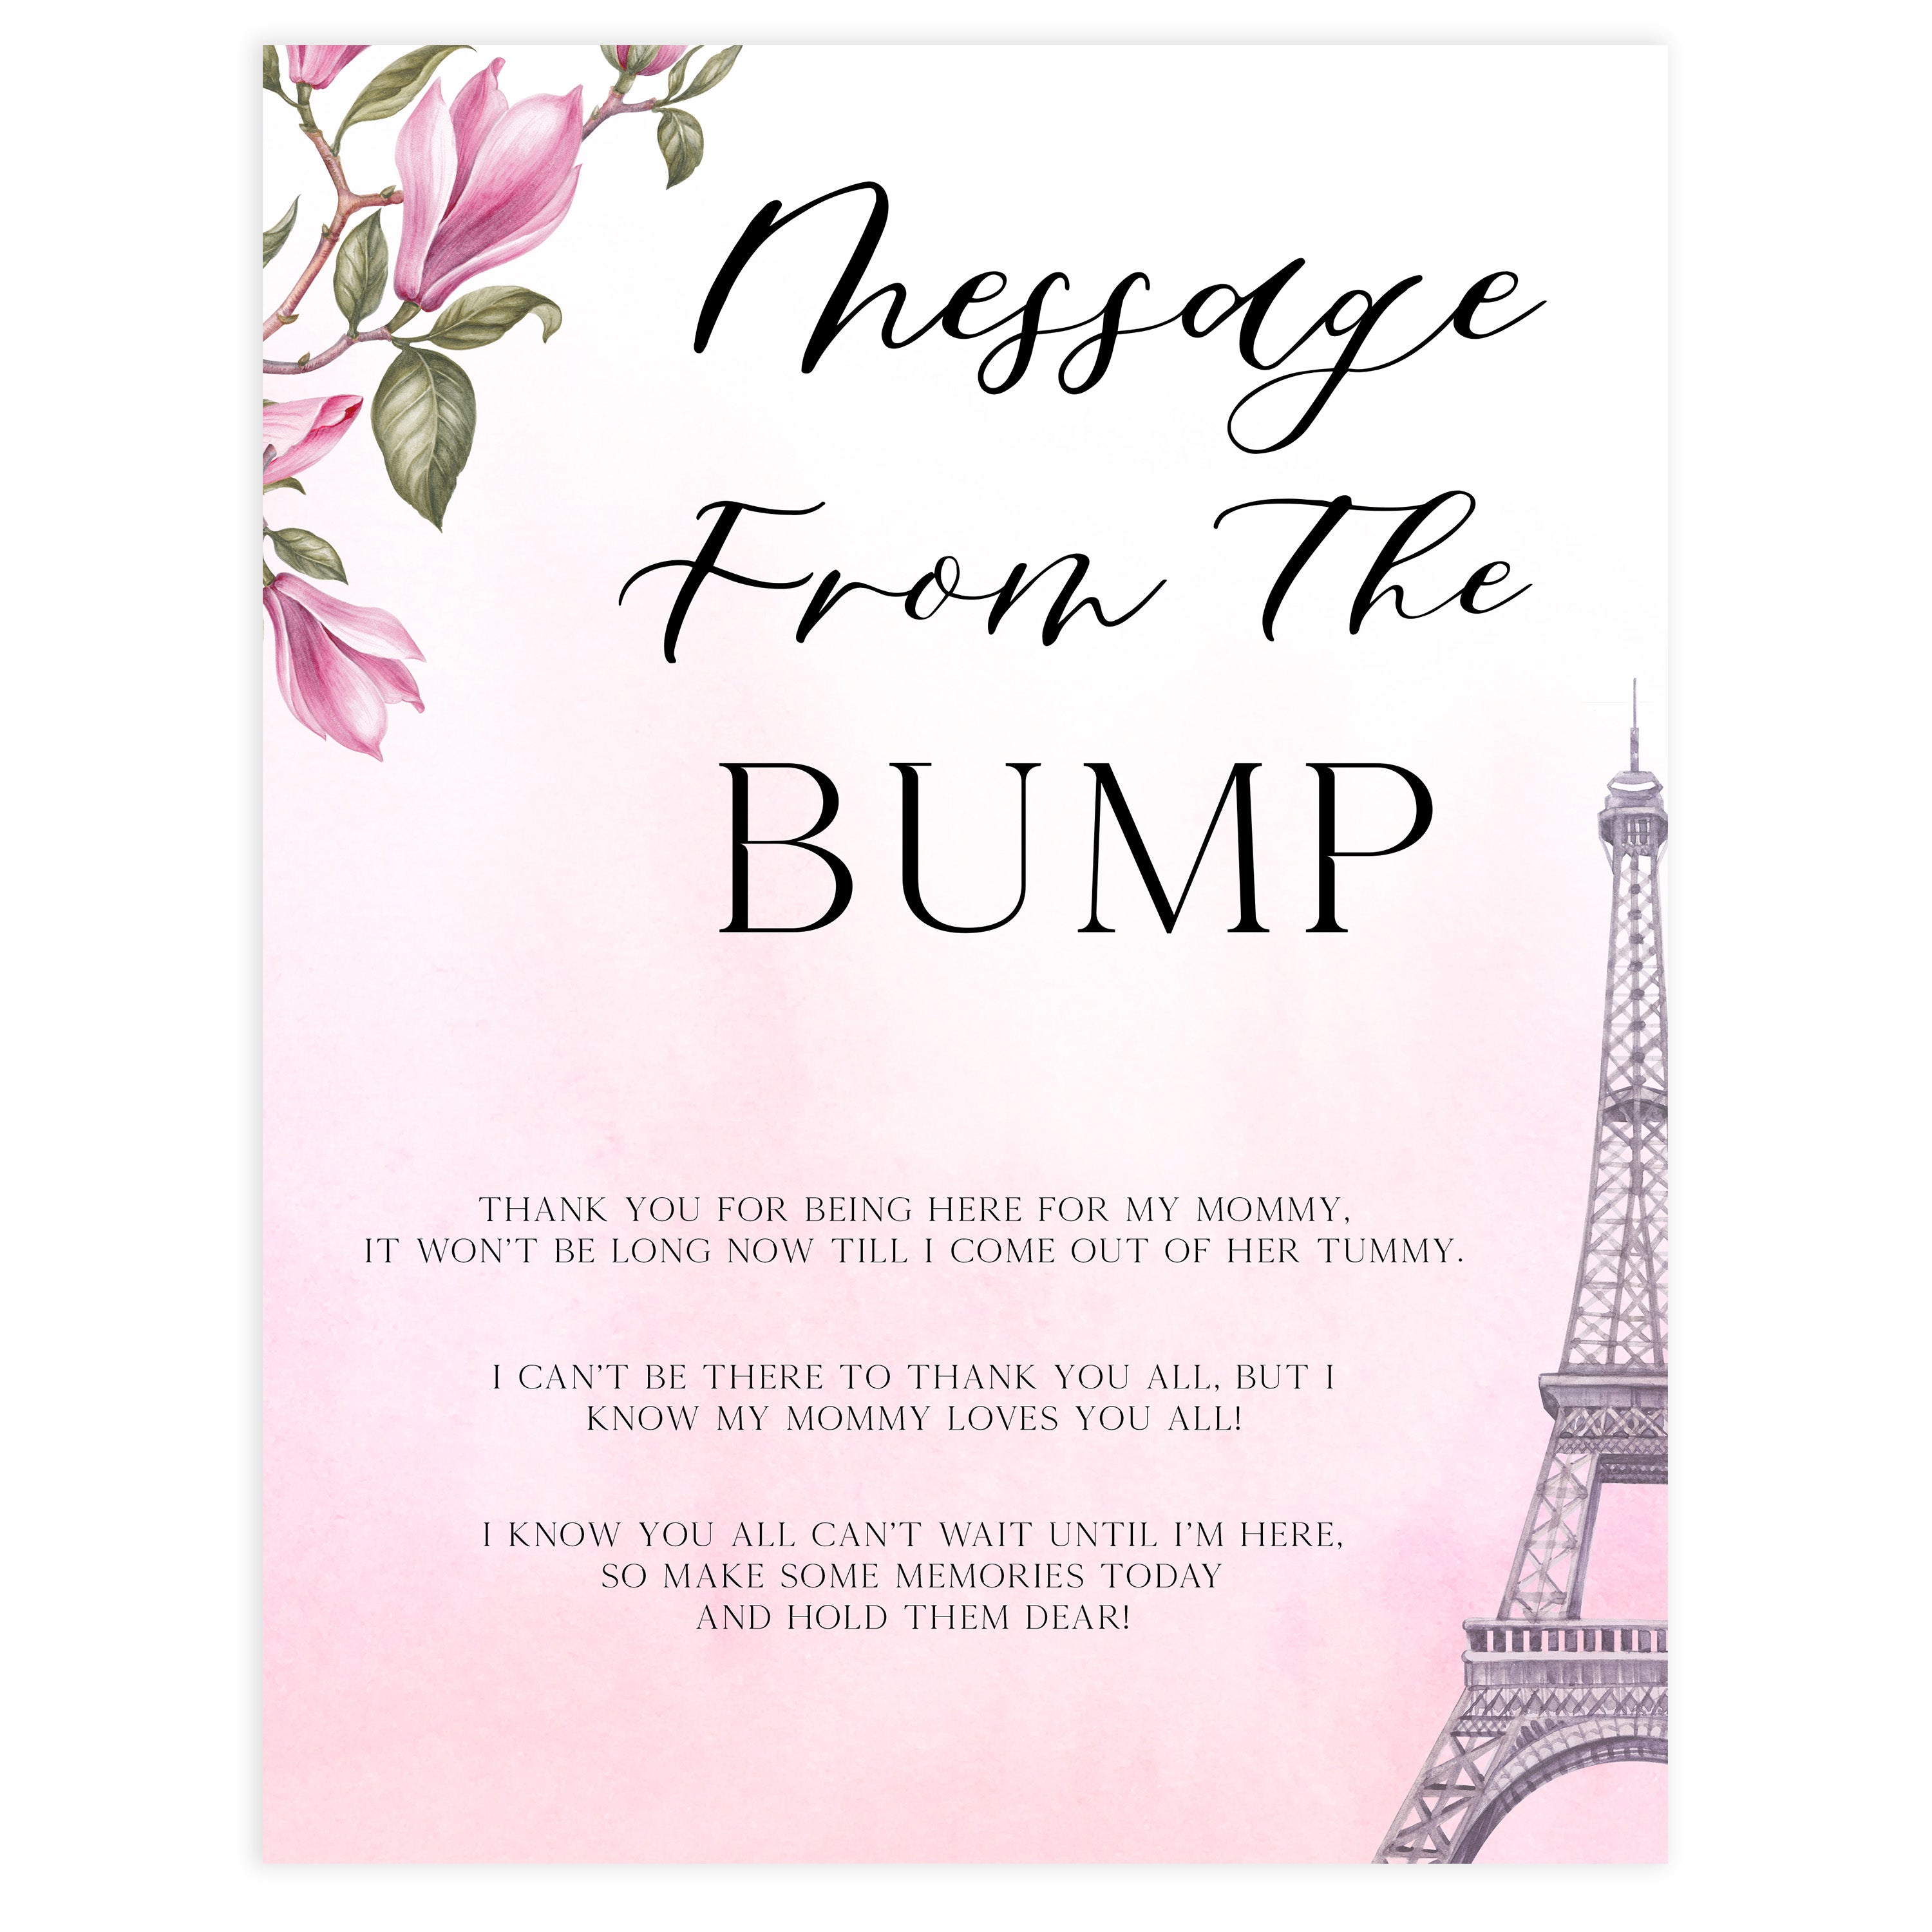 message from the bump baby game, Paris baby shower games, printable baby shower games, Parisian baby shower games, fun baby shower games